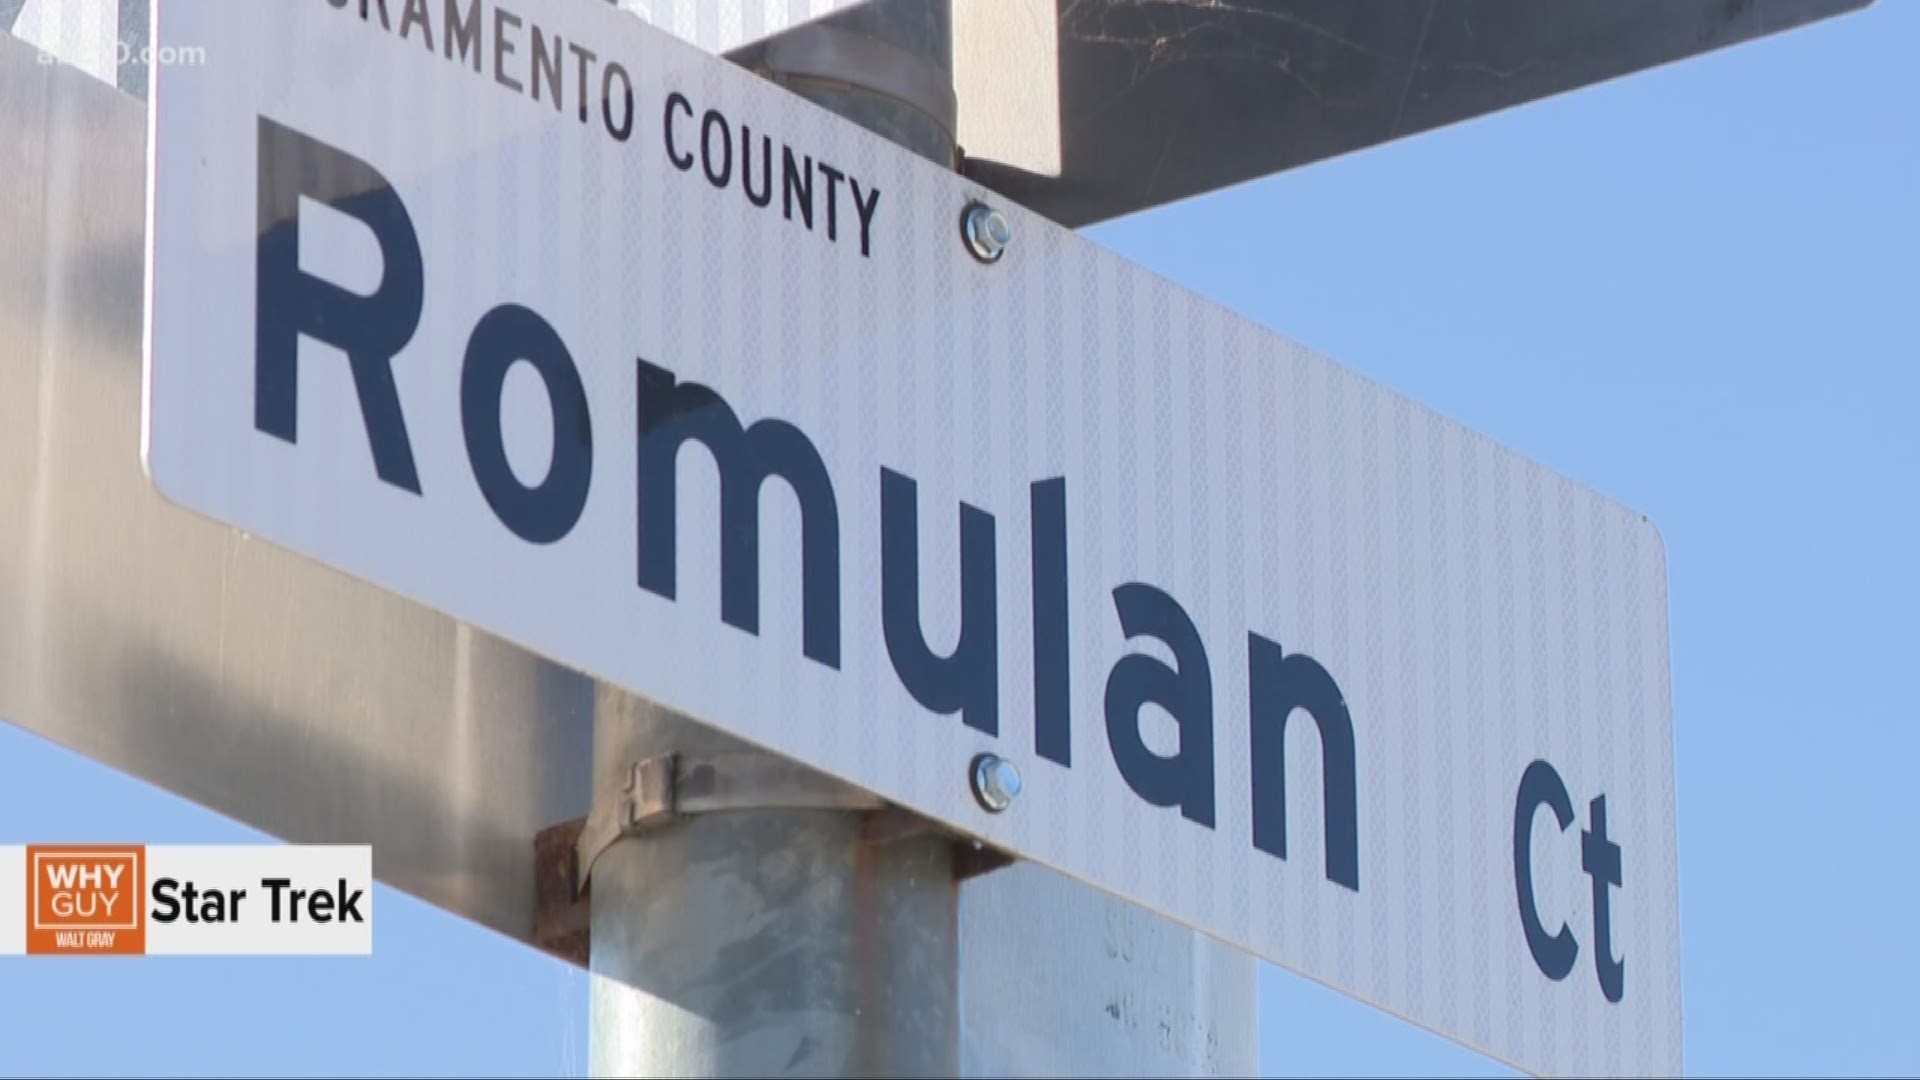 We're not talking about a galaxy far away. There is indeed an intersection in Sacramento County's Florin area where streets were named in honor of the hit show.